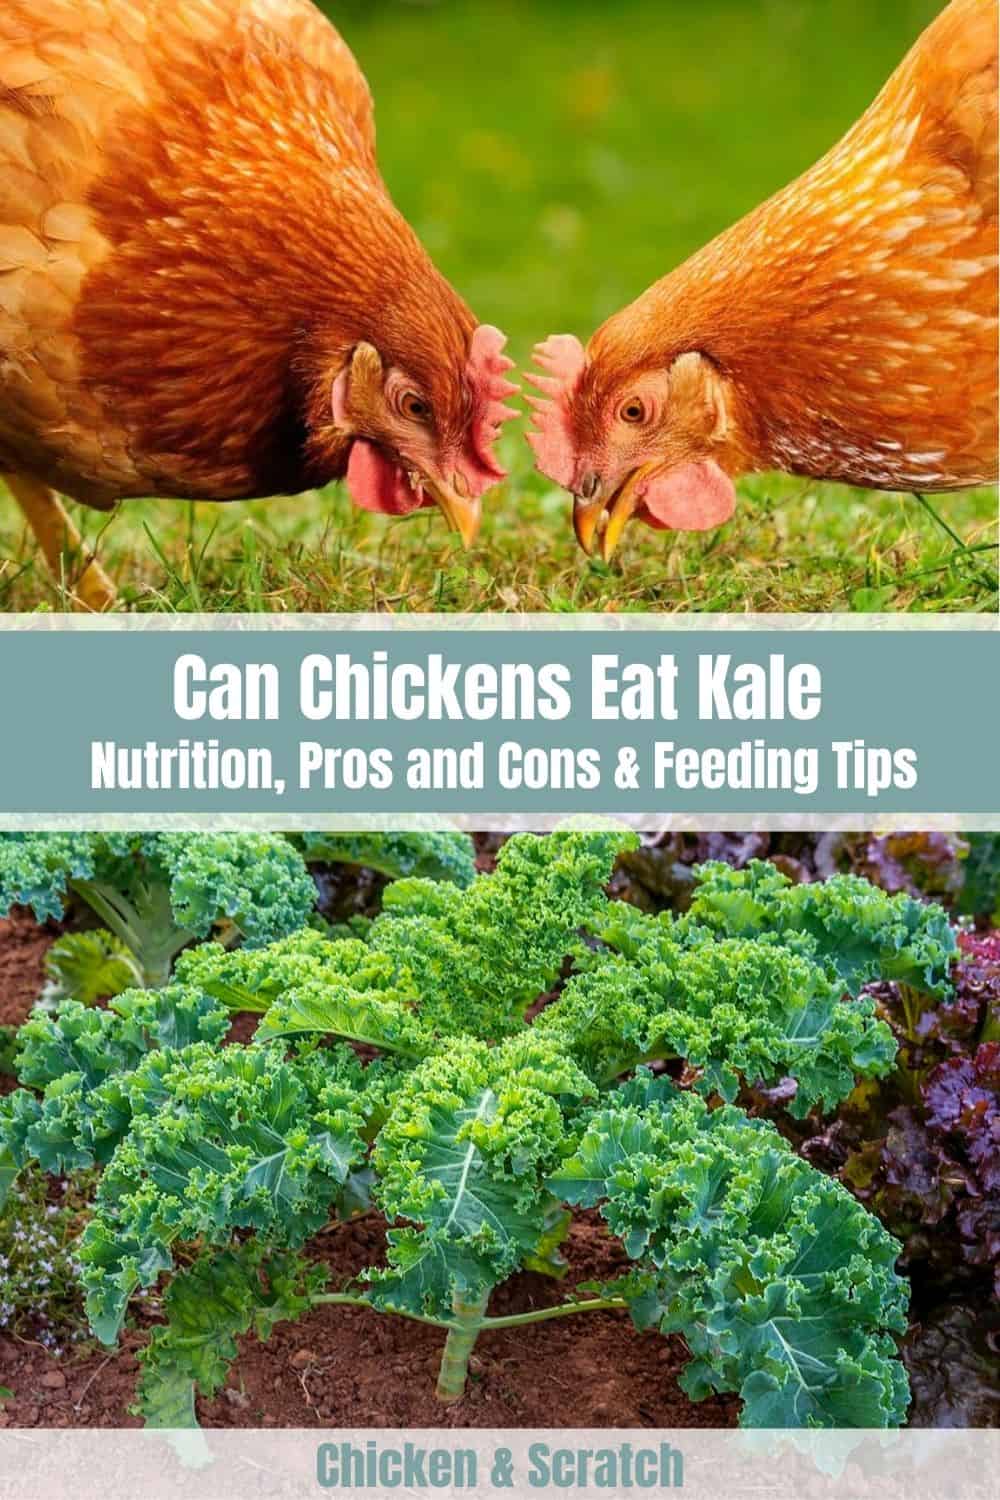 Can Chicken Eat Kale